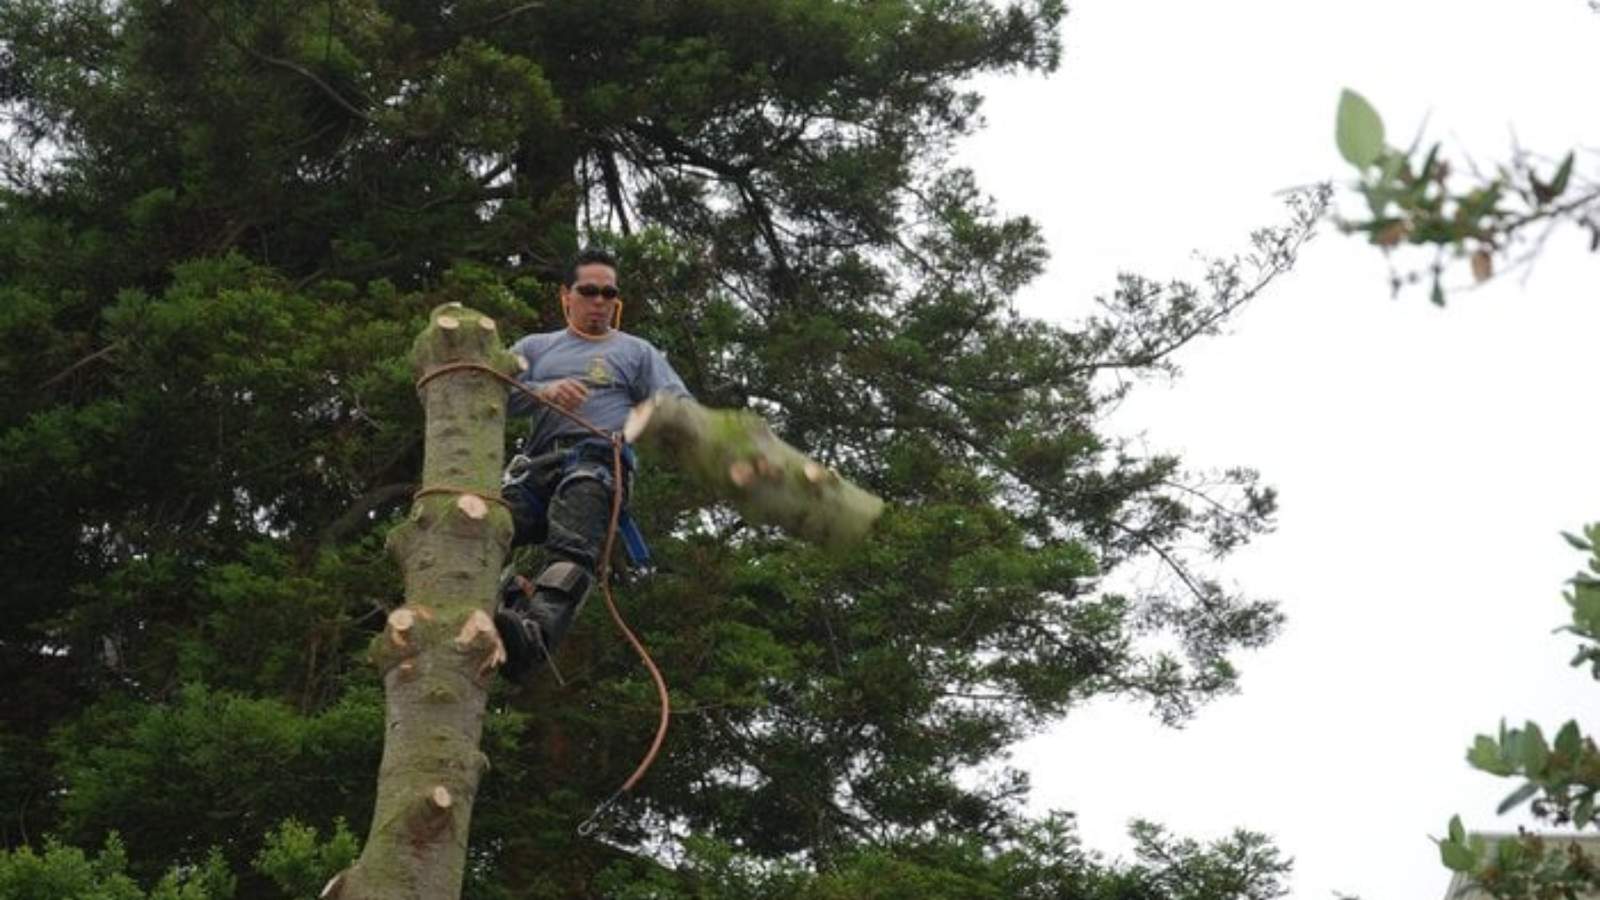 Tree Care services in San Francisco Bay Area